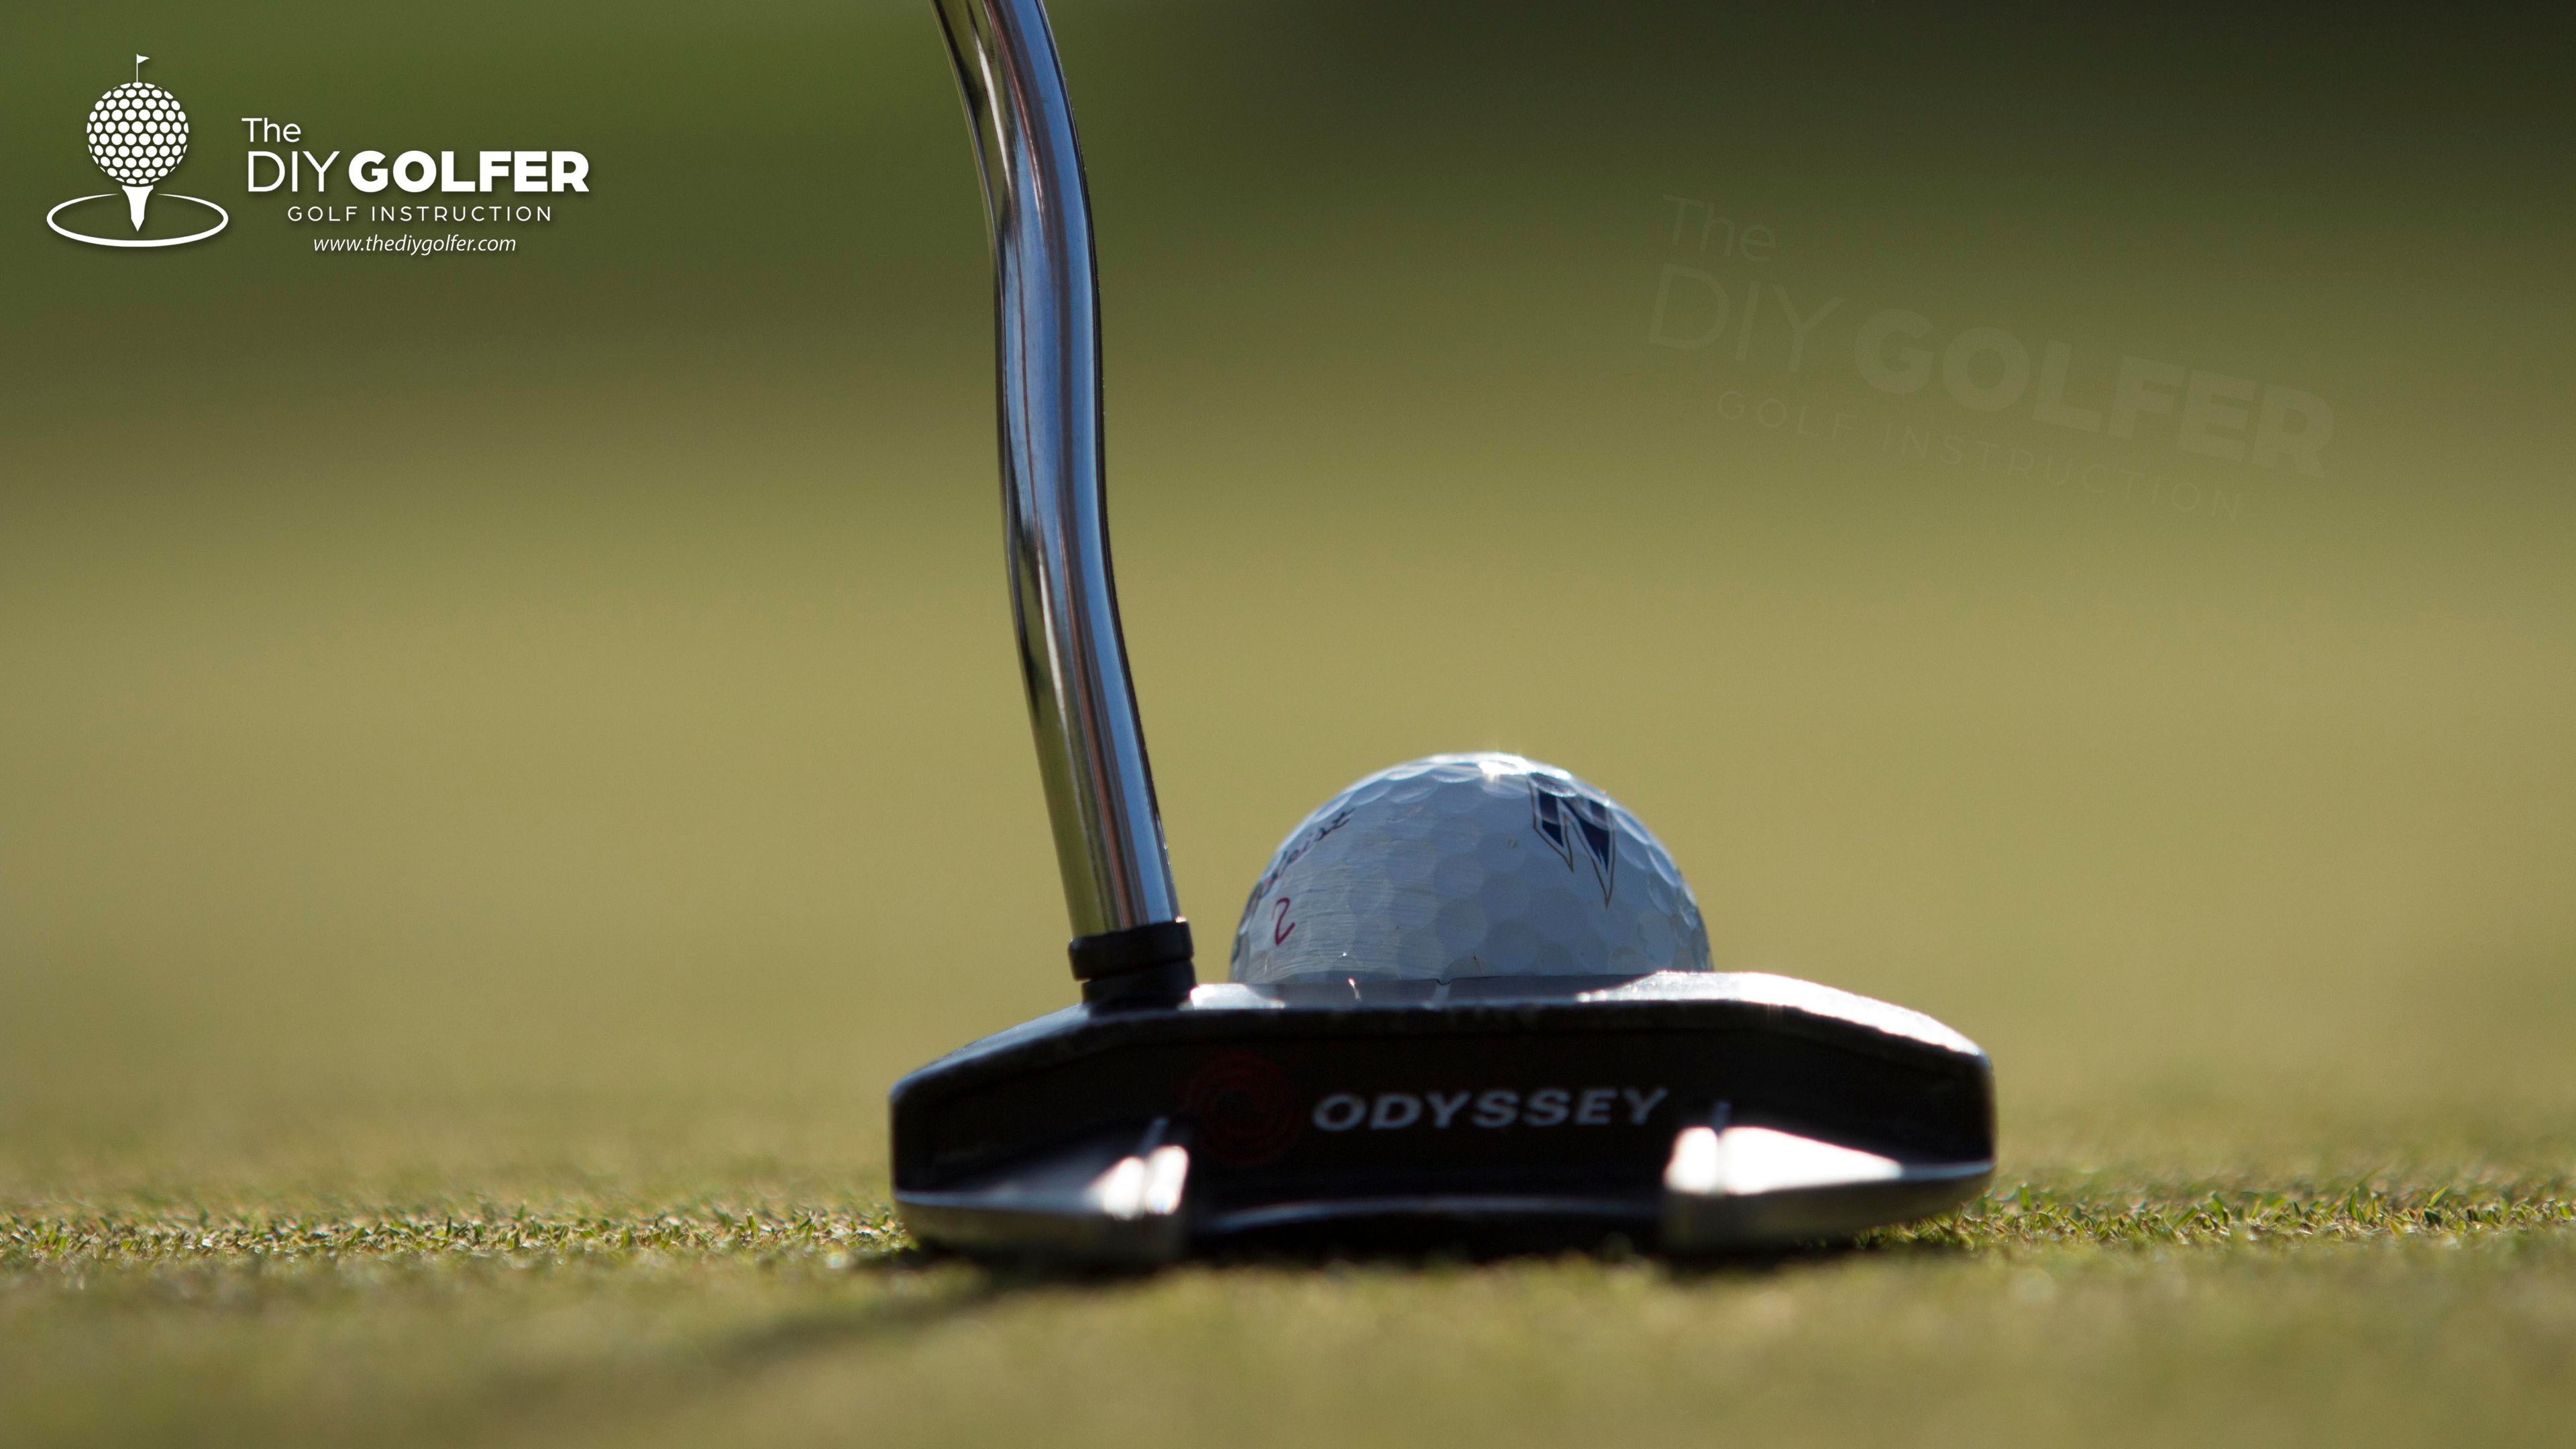 High Definition Golf Putting Photo: Up Close View